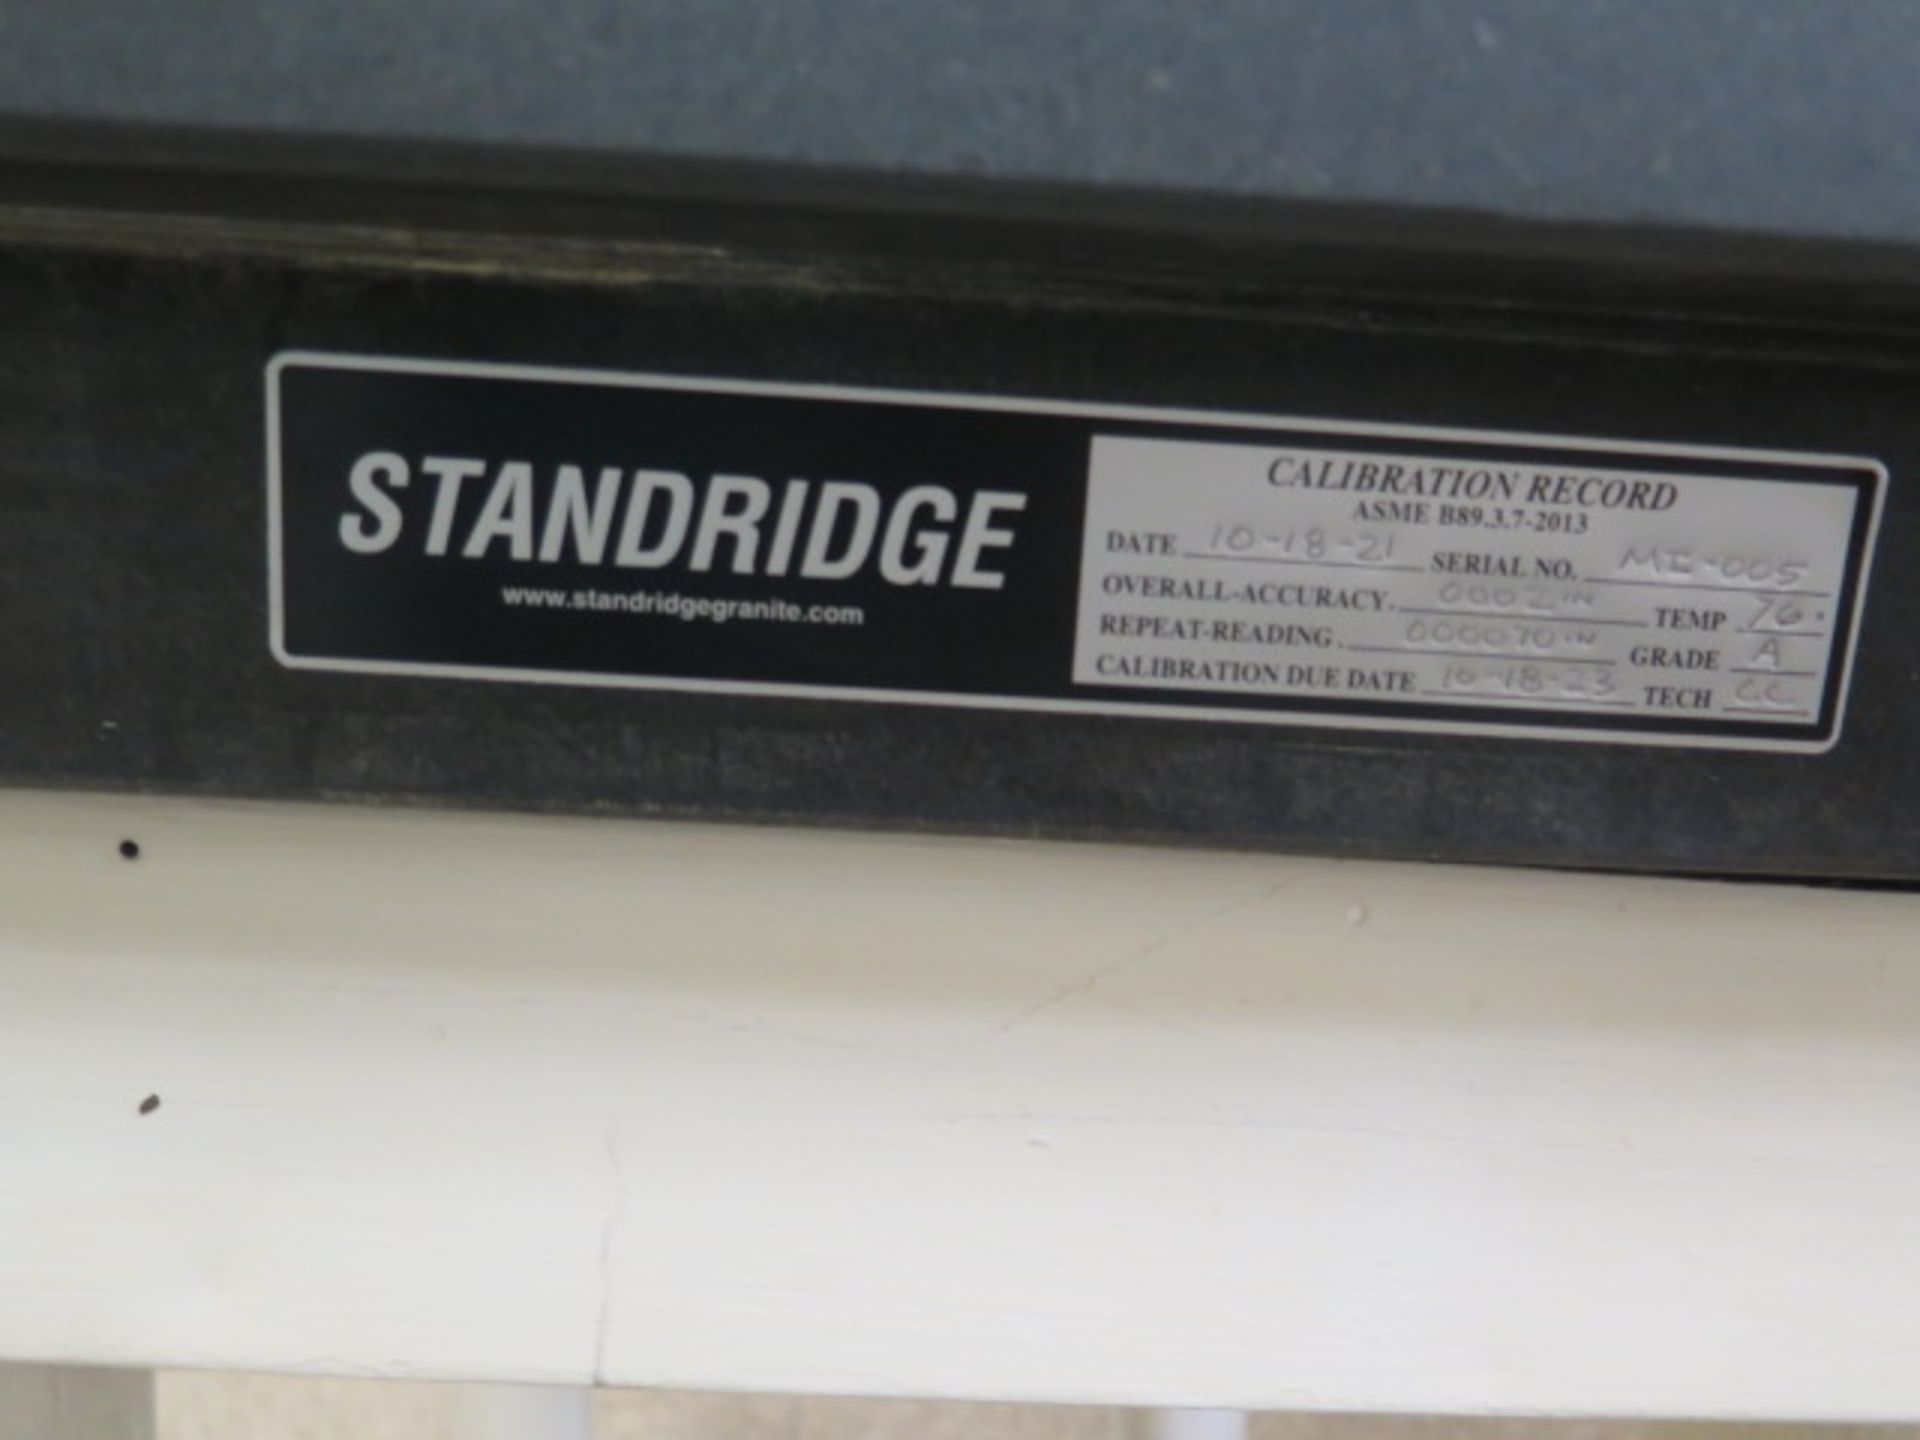 Standridge 24” x 36” x 6” 4-Ledge Granite Surface Plate w/ Stand (SOLD AS-IS - NO WARRANTY) - Image 5 of 5